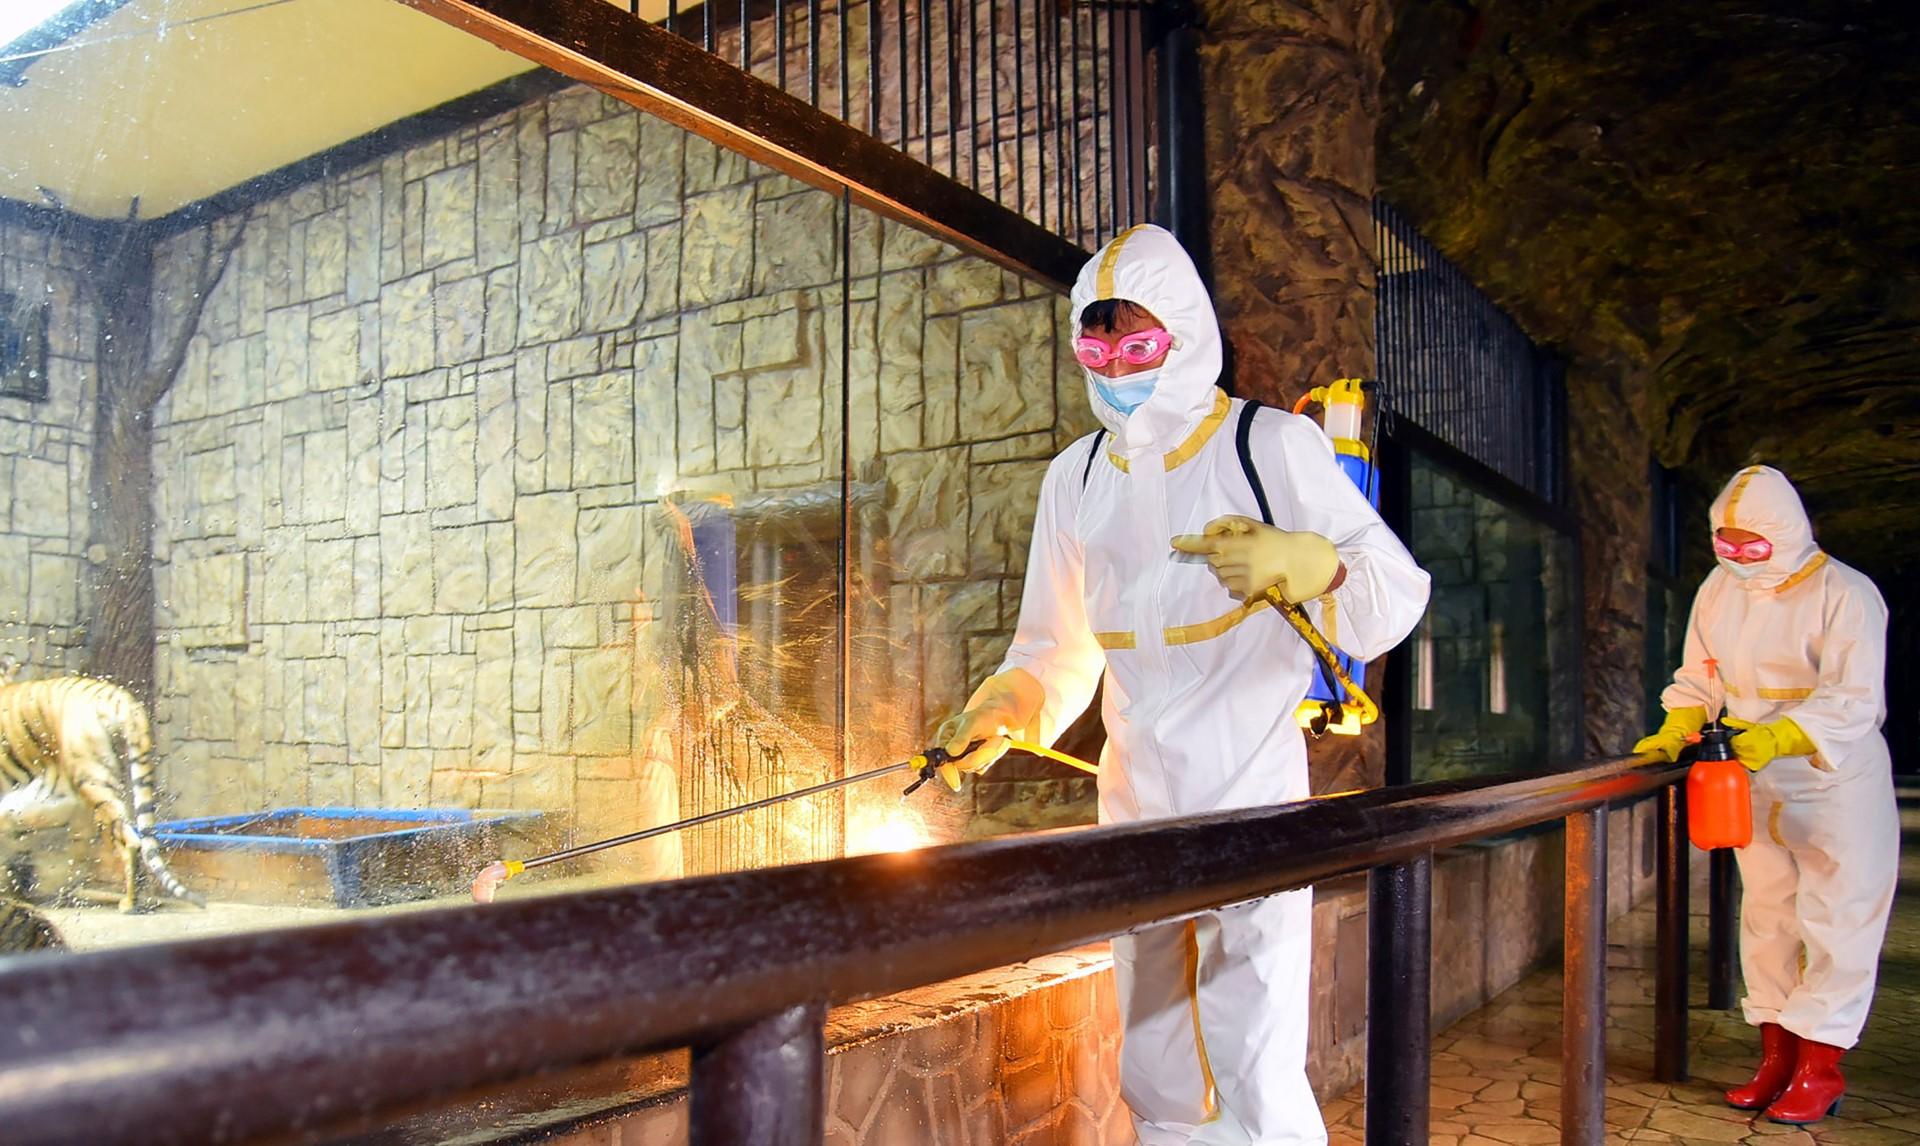 This undated picture released from North Korea's official Korean Central News Agency on May 20 shows employees of the Central Ideals Zoo disinfecting the zoo to prevent the spread of Covid-19 in Pyongyang. Photo: AFP/KCNA via KNS